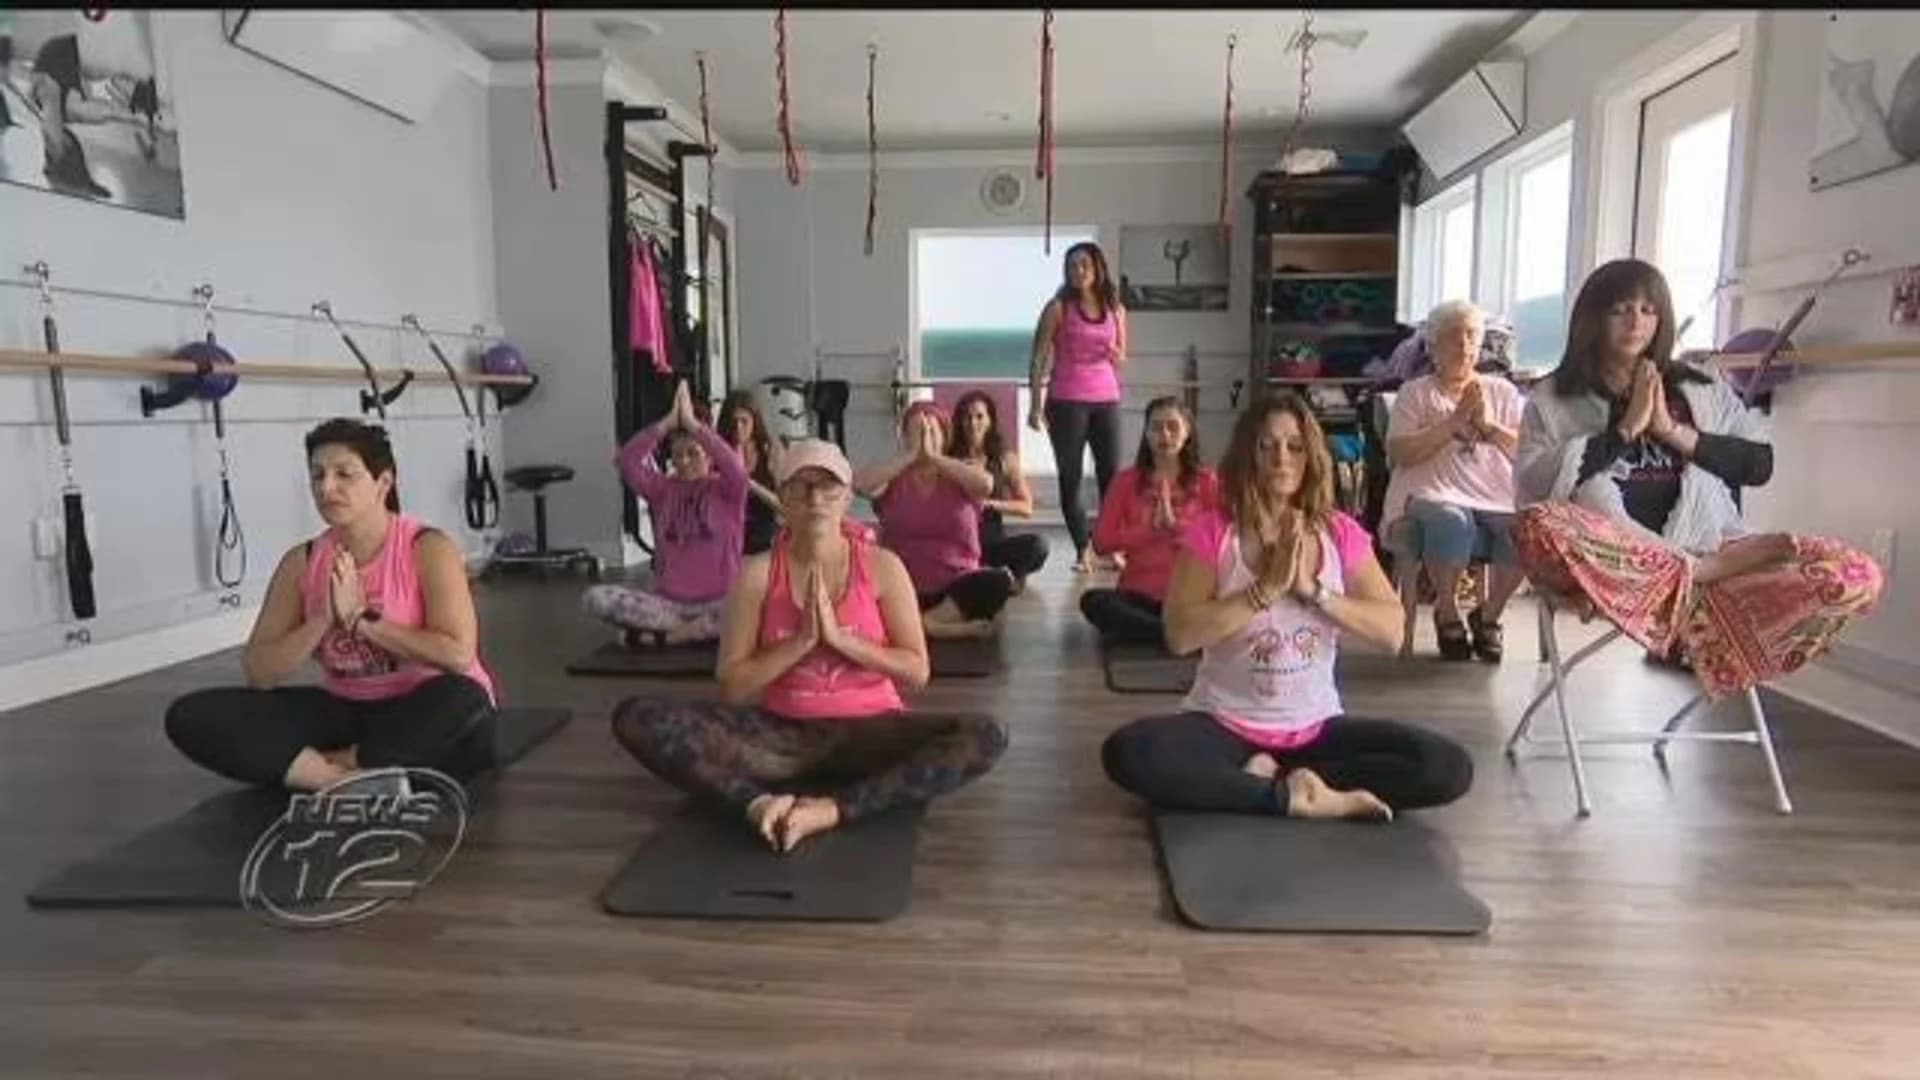 Bosom Buddy Challenge aims to help breast cancer patients